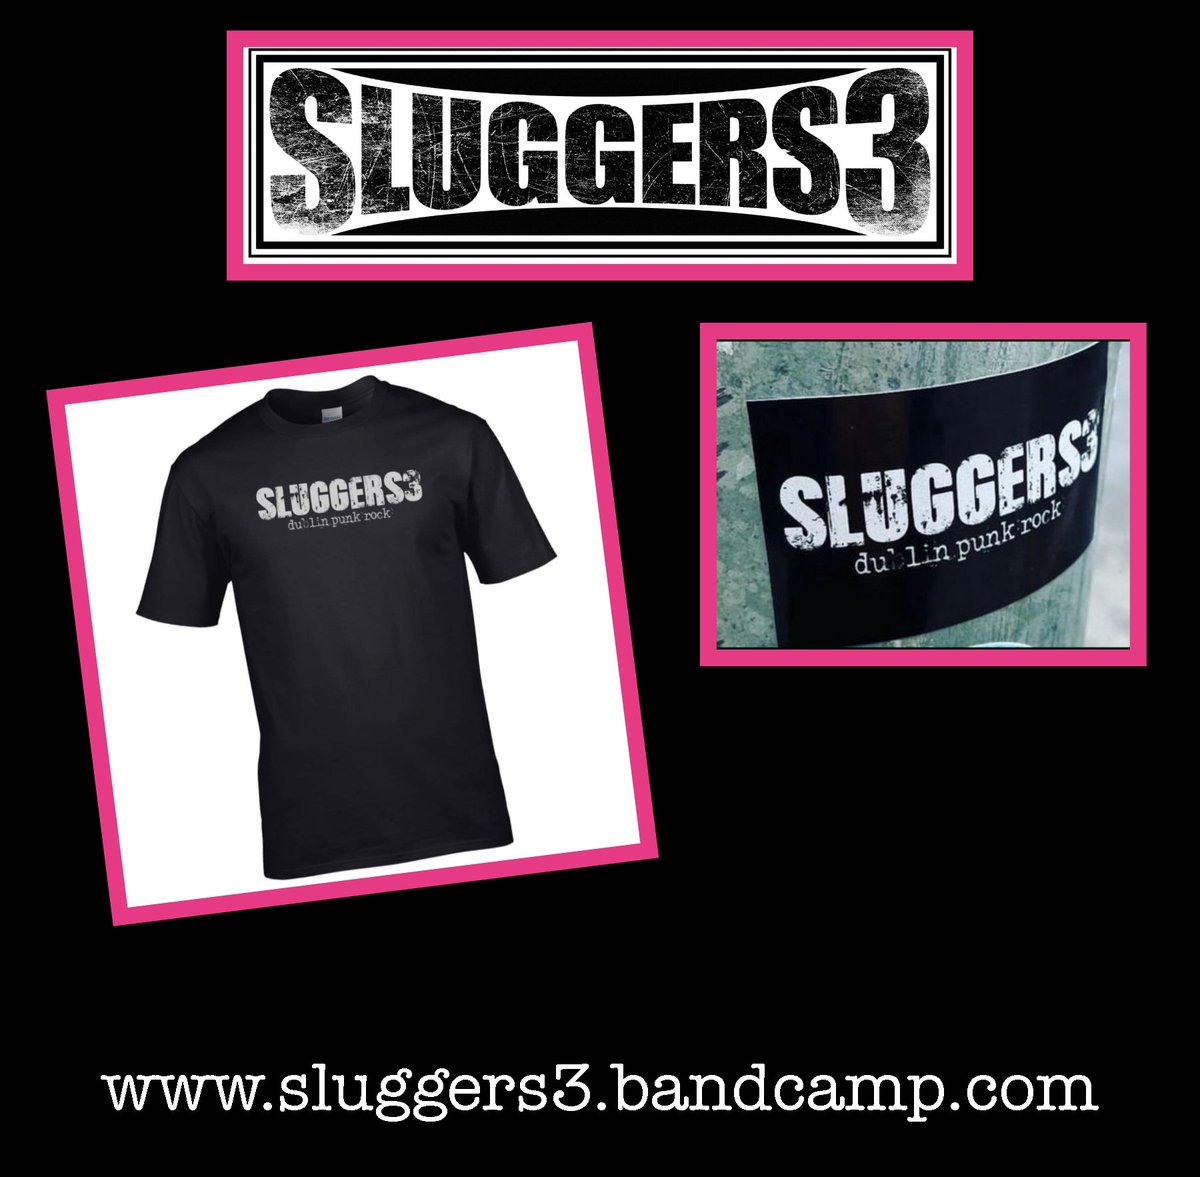 sluggers3.bandcamp.com for t-shirts, stickers and badges #punk #merch #tshirtslovers